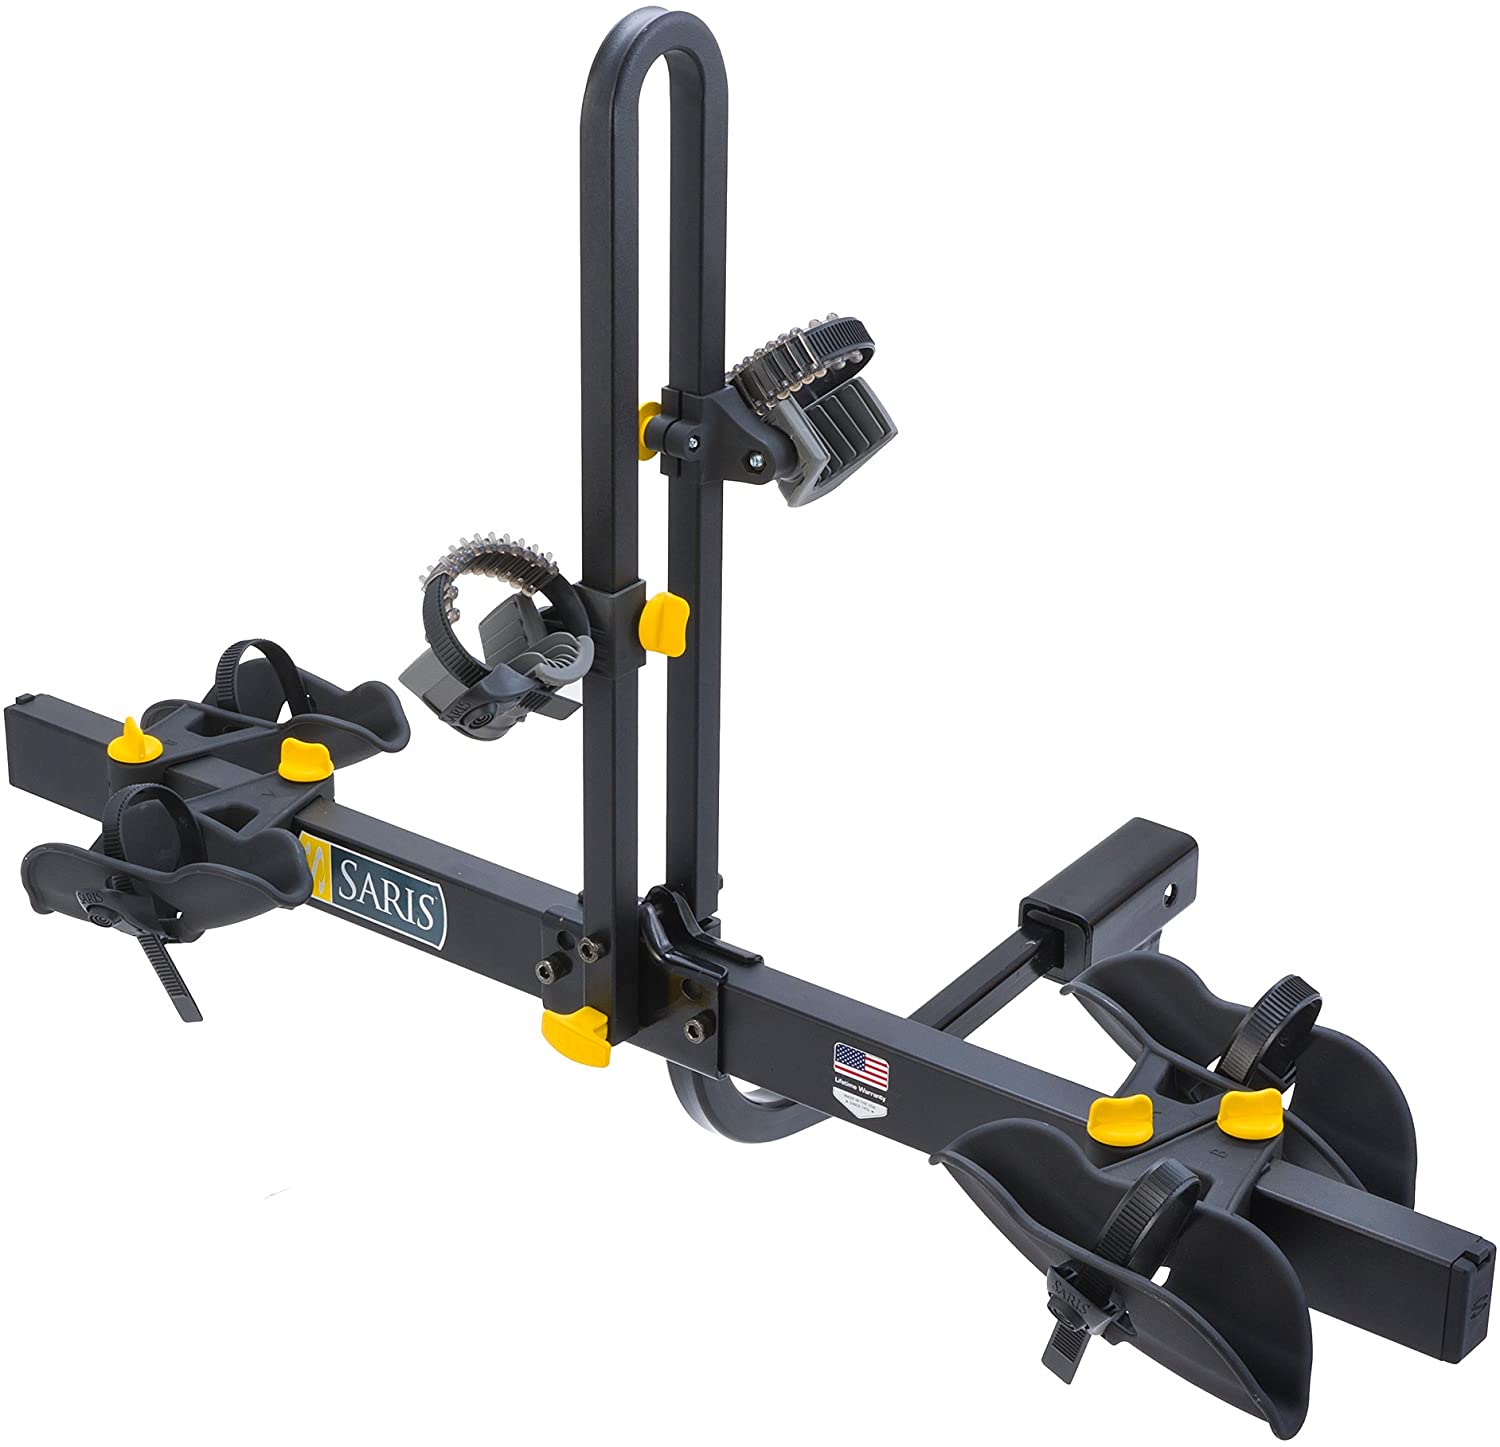 Saris Freedom Bike Hitch and Spare Tire Car Rack